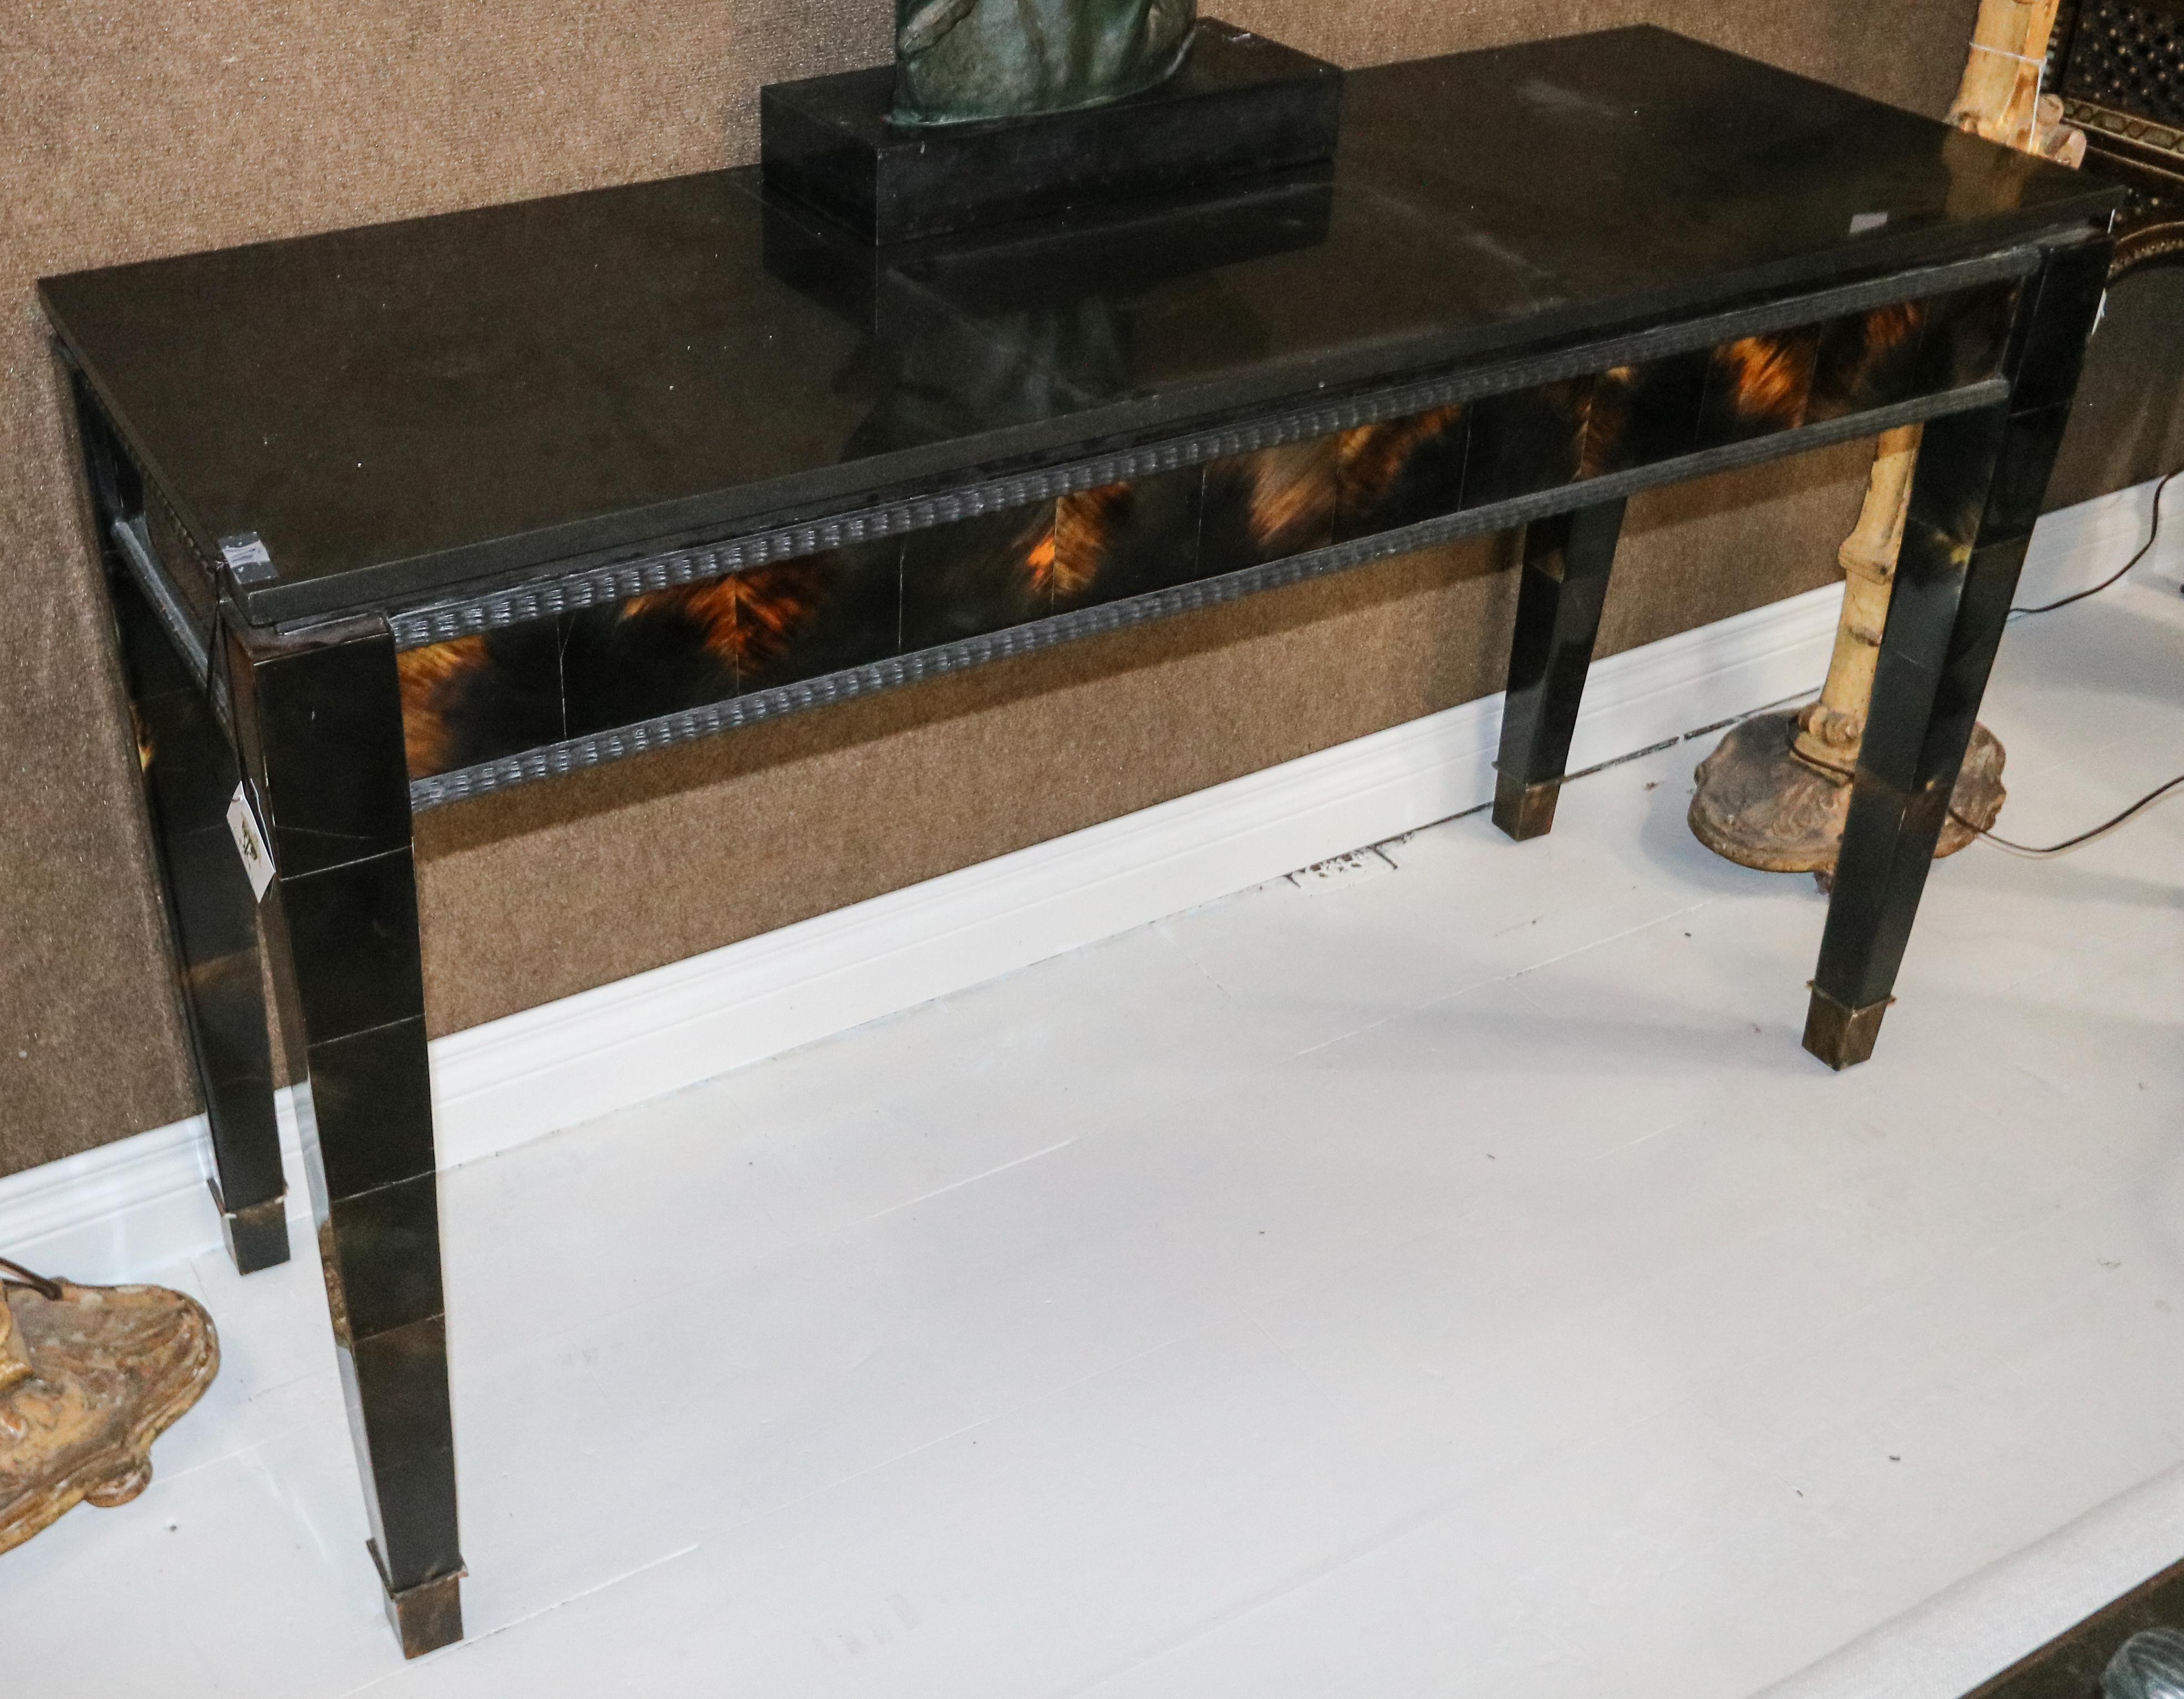 1940s Italian black lacquer console table with horn detail on the front and a black marble top.